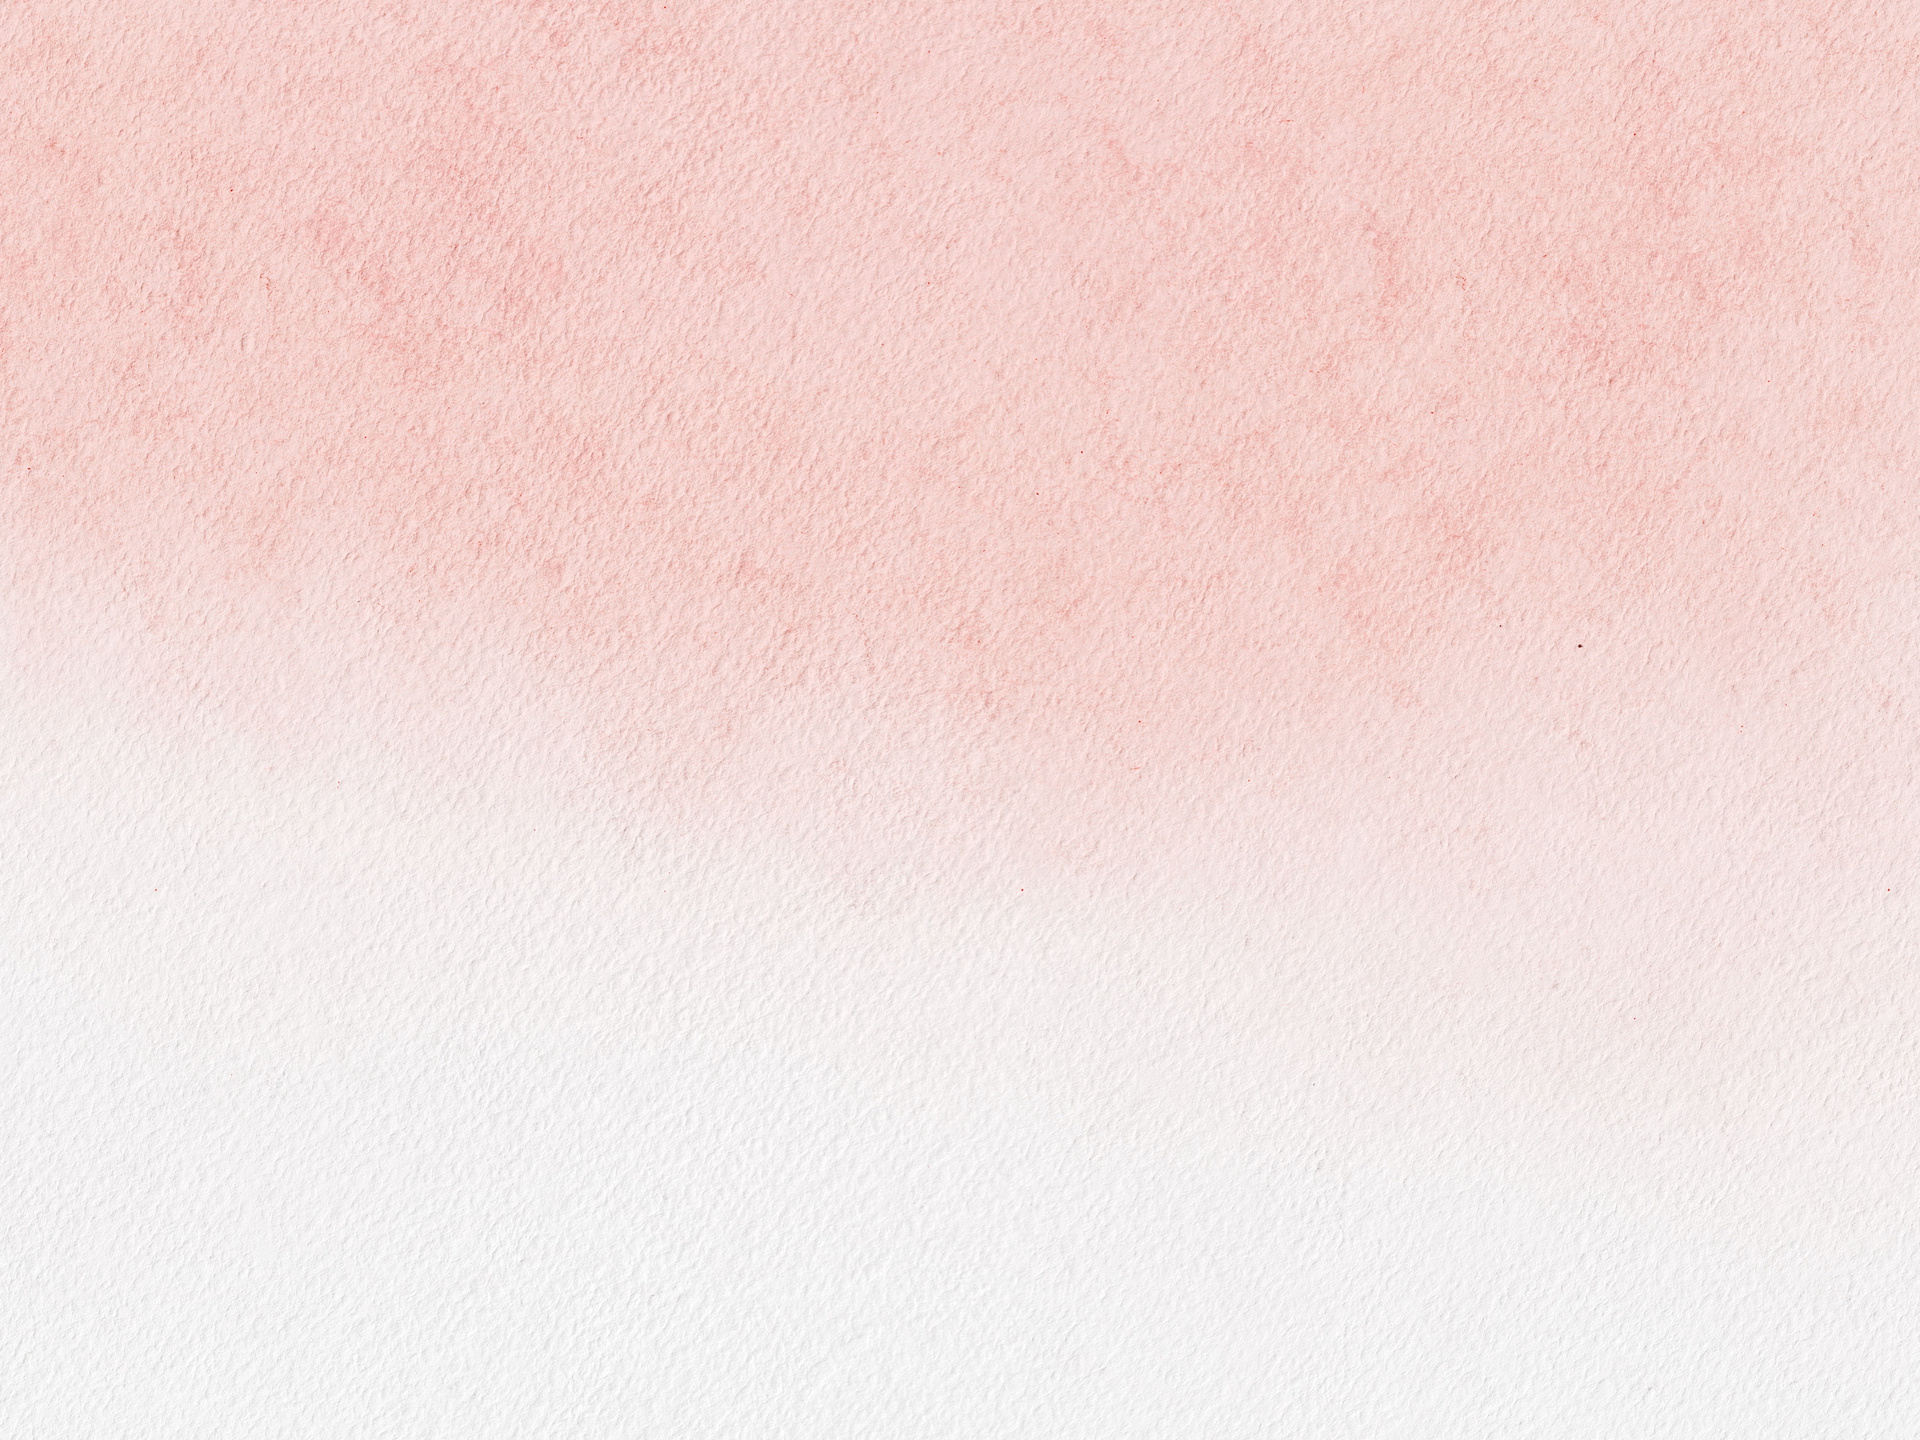 Gradeint Pink and white painted watercolor background paper